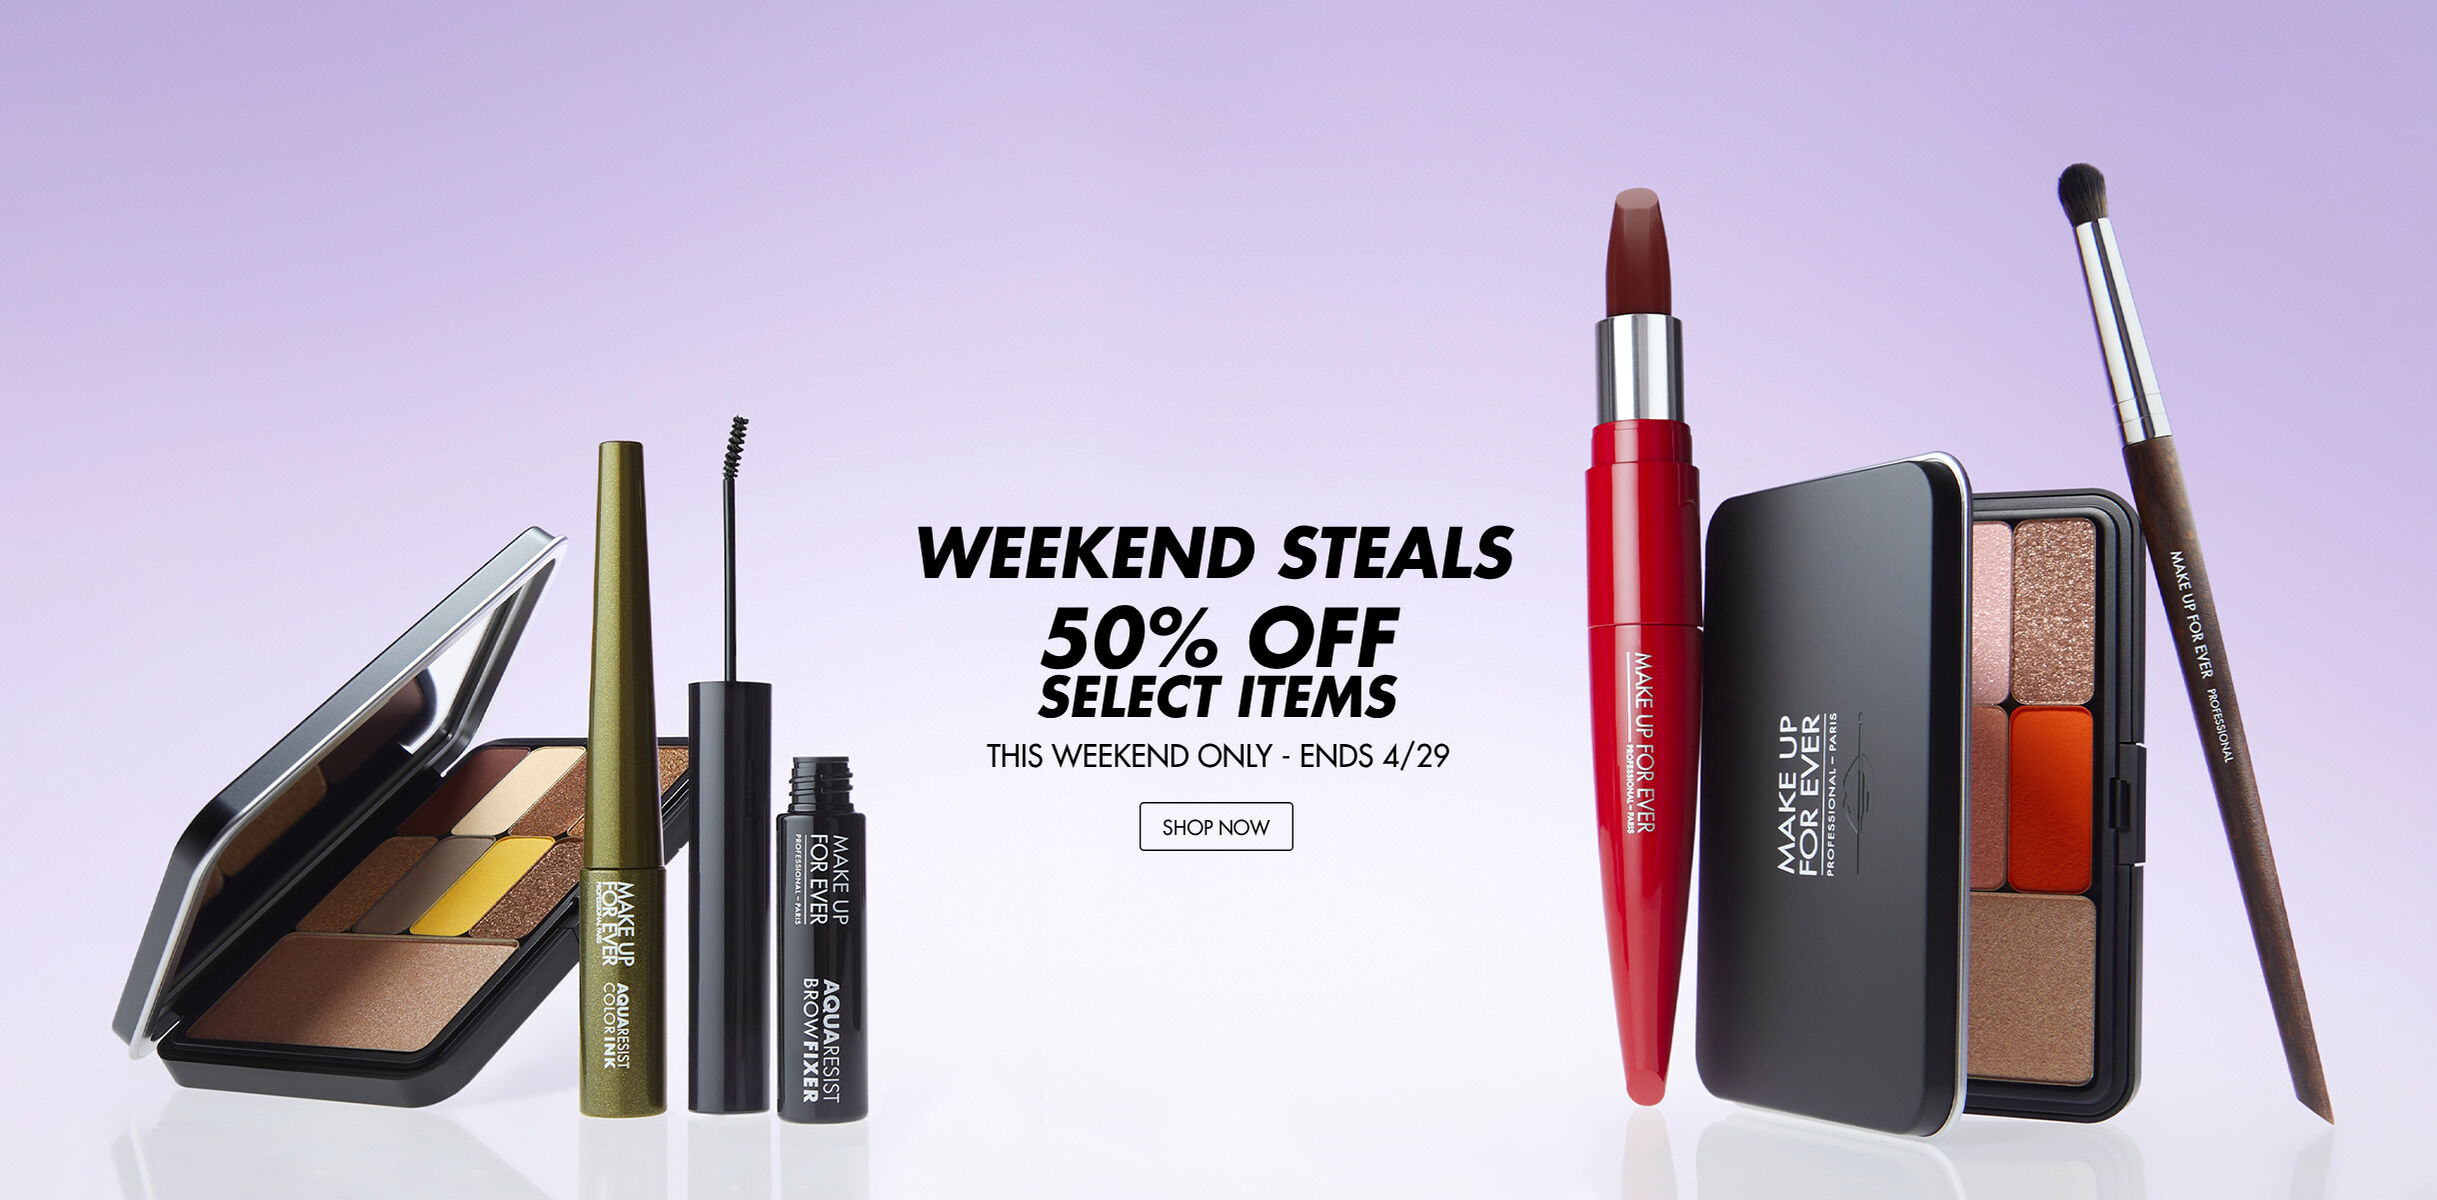 WEEKEND STEALS - 50% OFF SELECT ITEMS